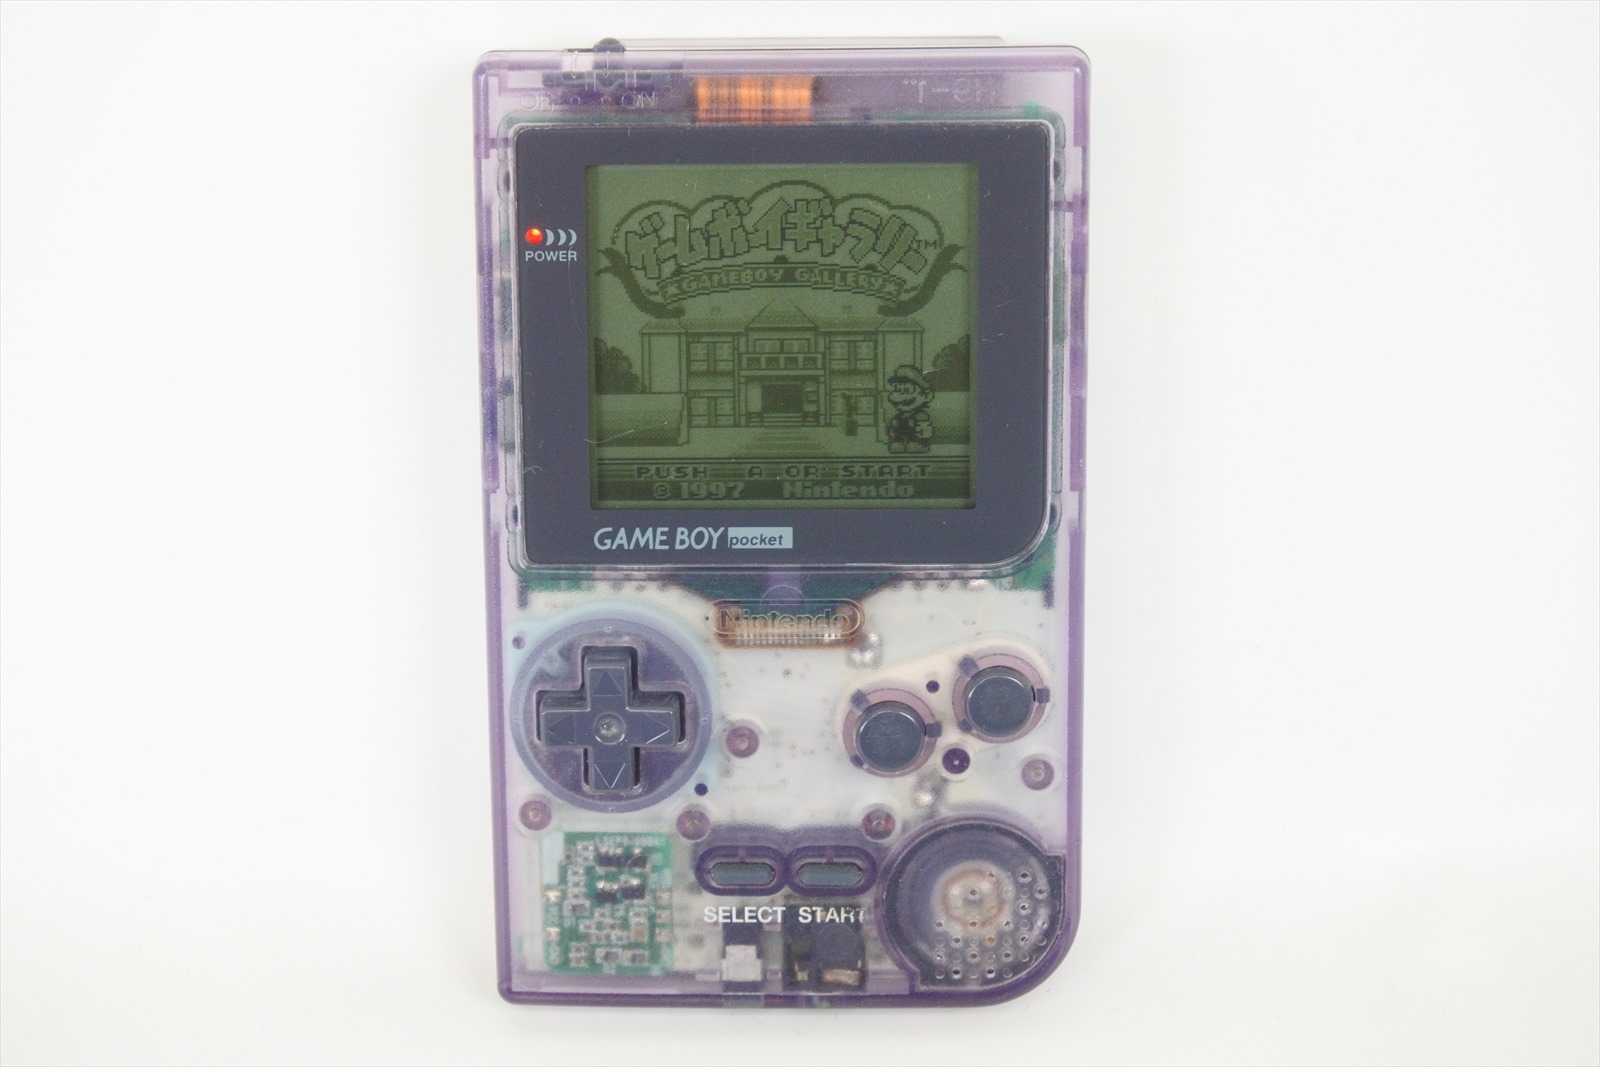 Obsessed with the Pocket Console. Mine game boy